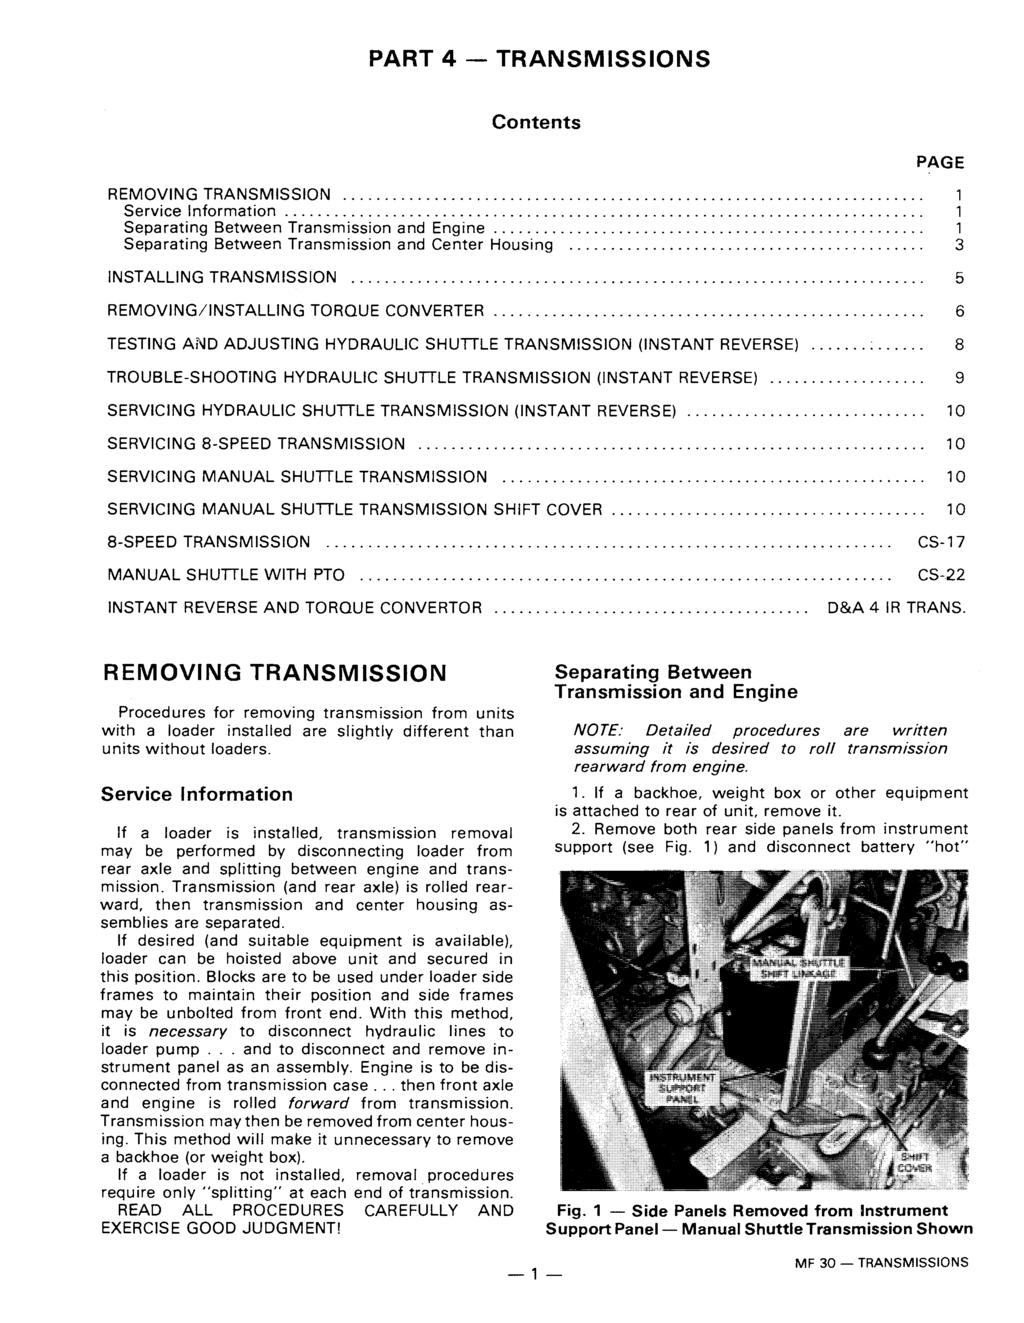 PART 4 - TRANSMISSIONS Contents REMOVING TRANSMISSION... 1 Service Information............................................................................. 1 Separating Between Transmission and Engine.